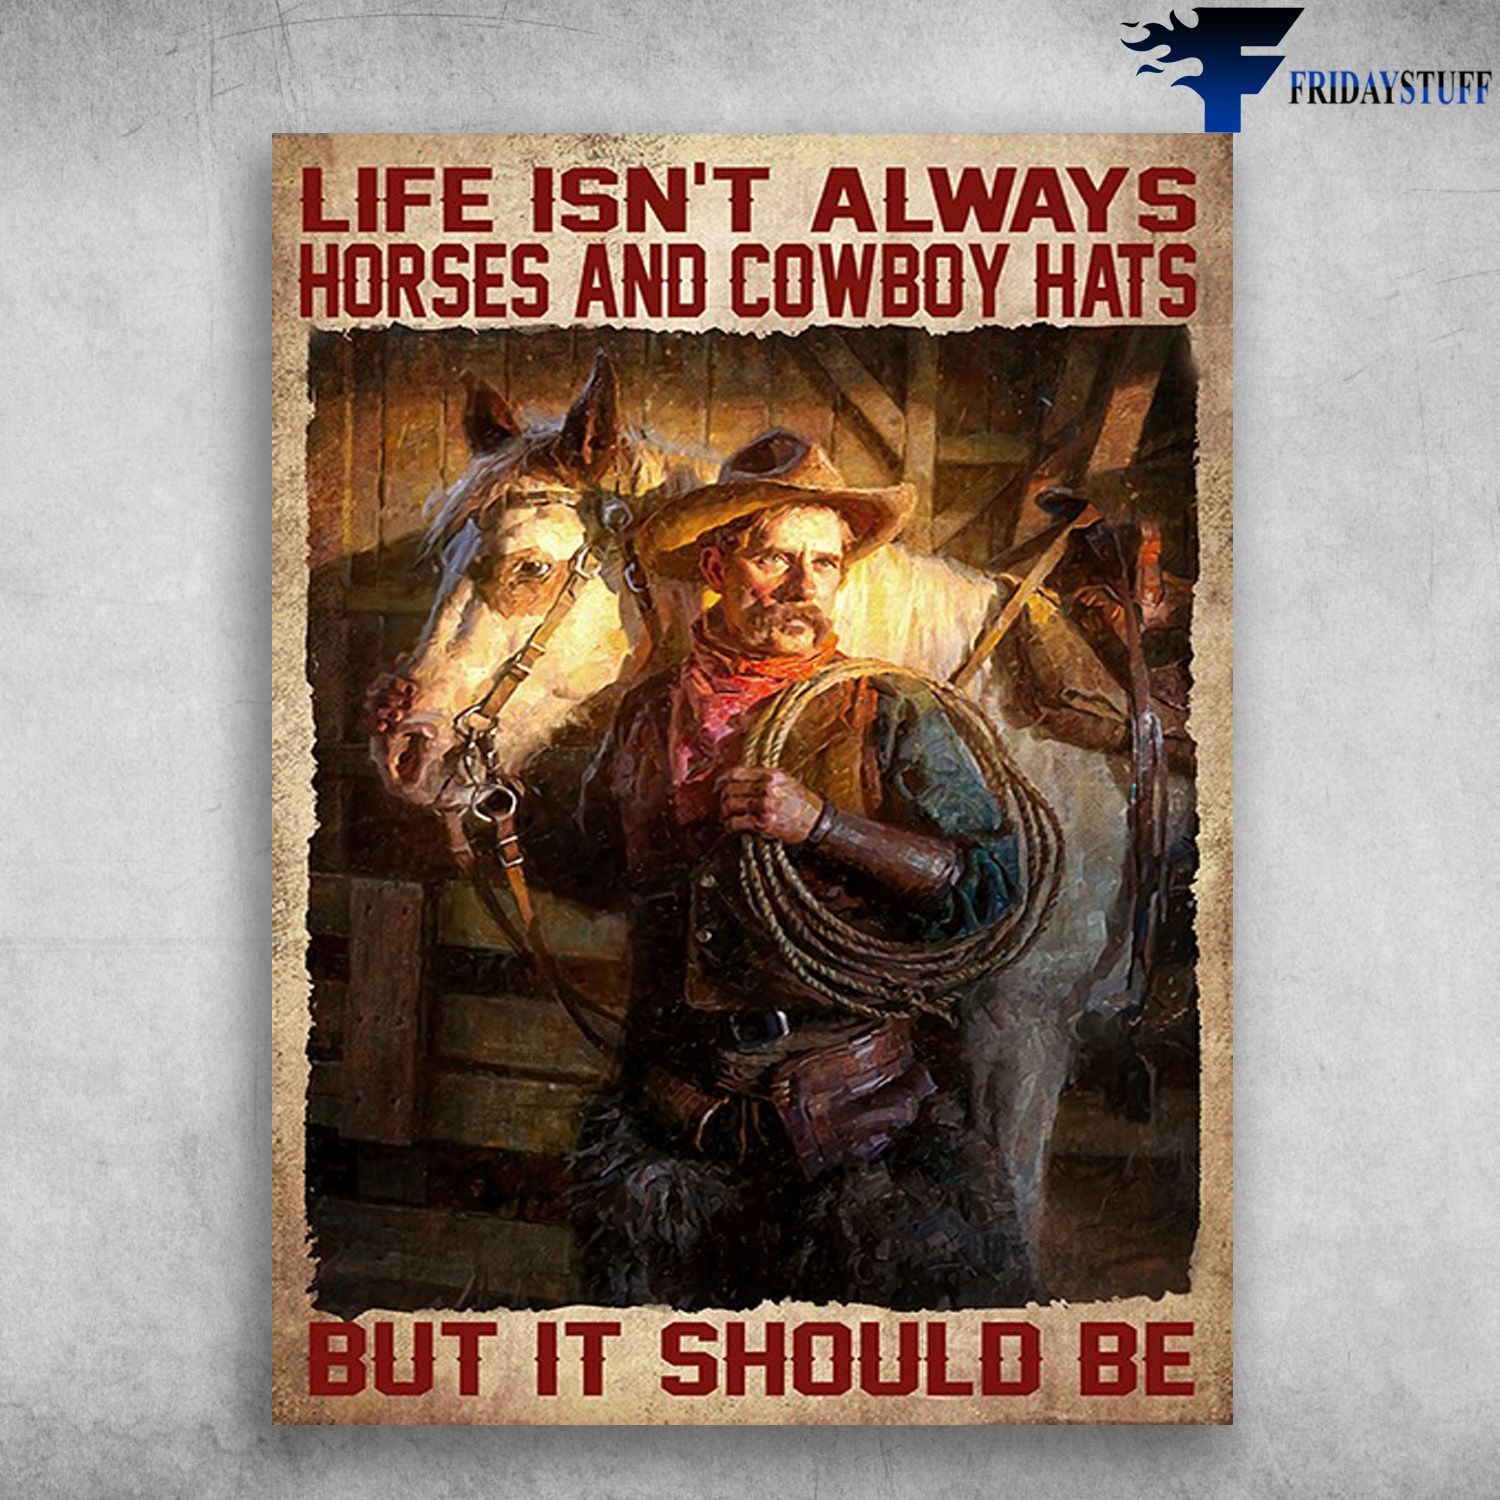 Cowboy And Horse, Horse Lover - Life Isn't Always, Horse And Cowboy Hat, But It Should Be